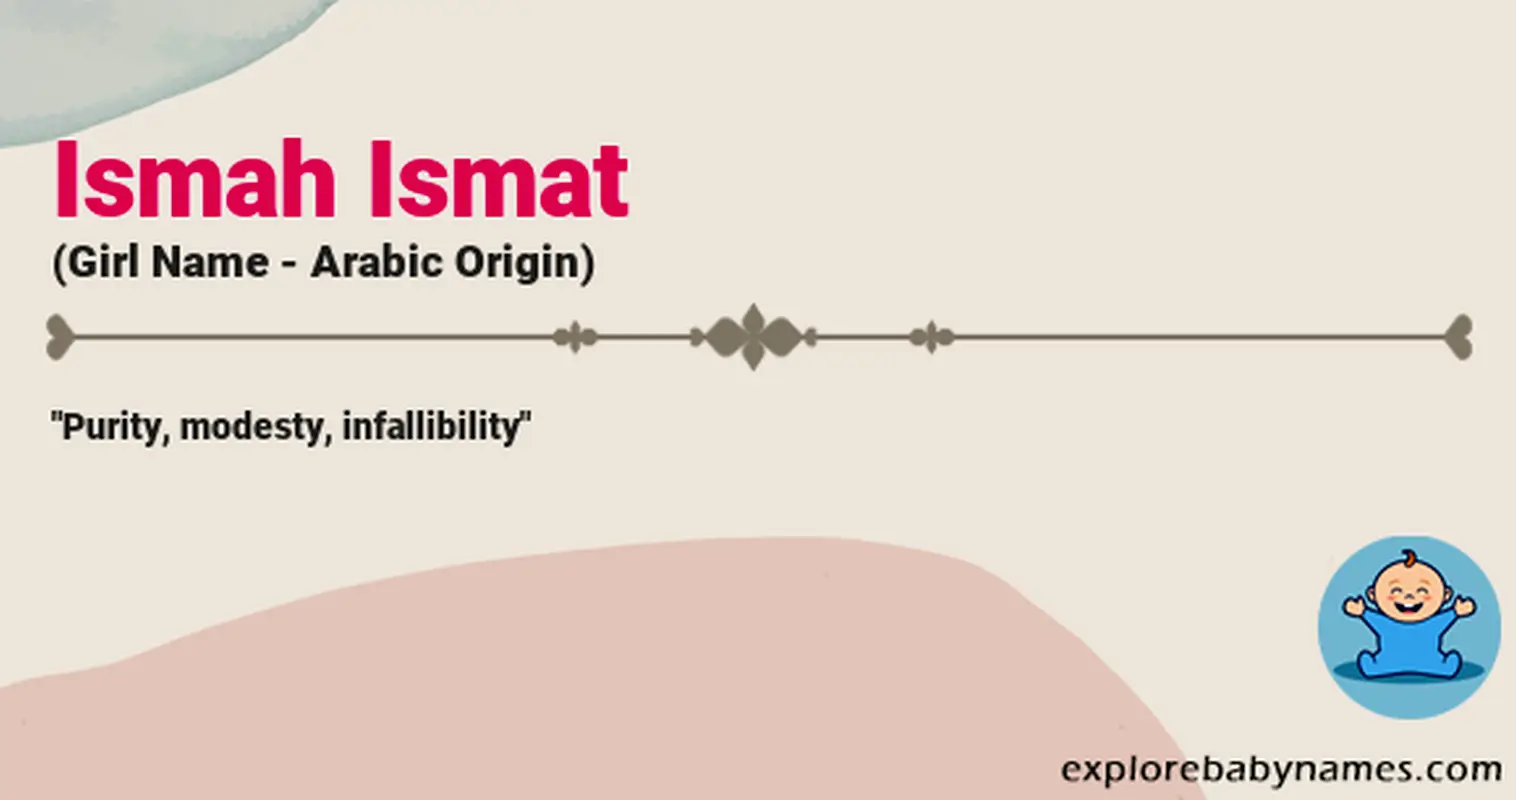 Meaning of Ismah Ismat